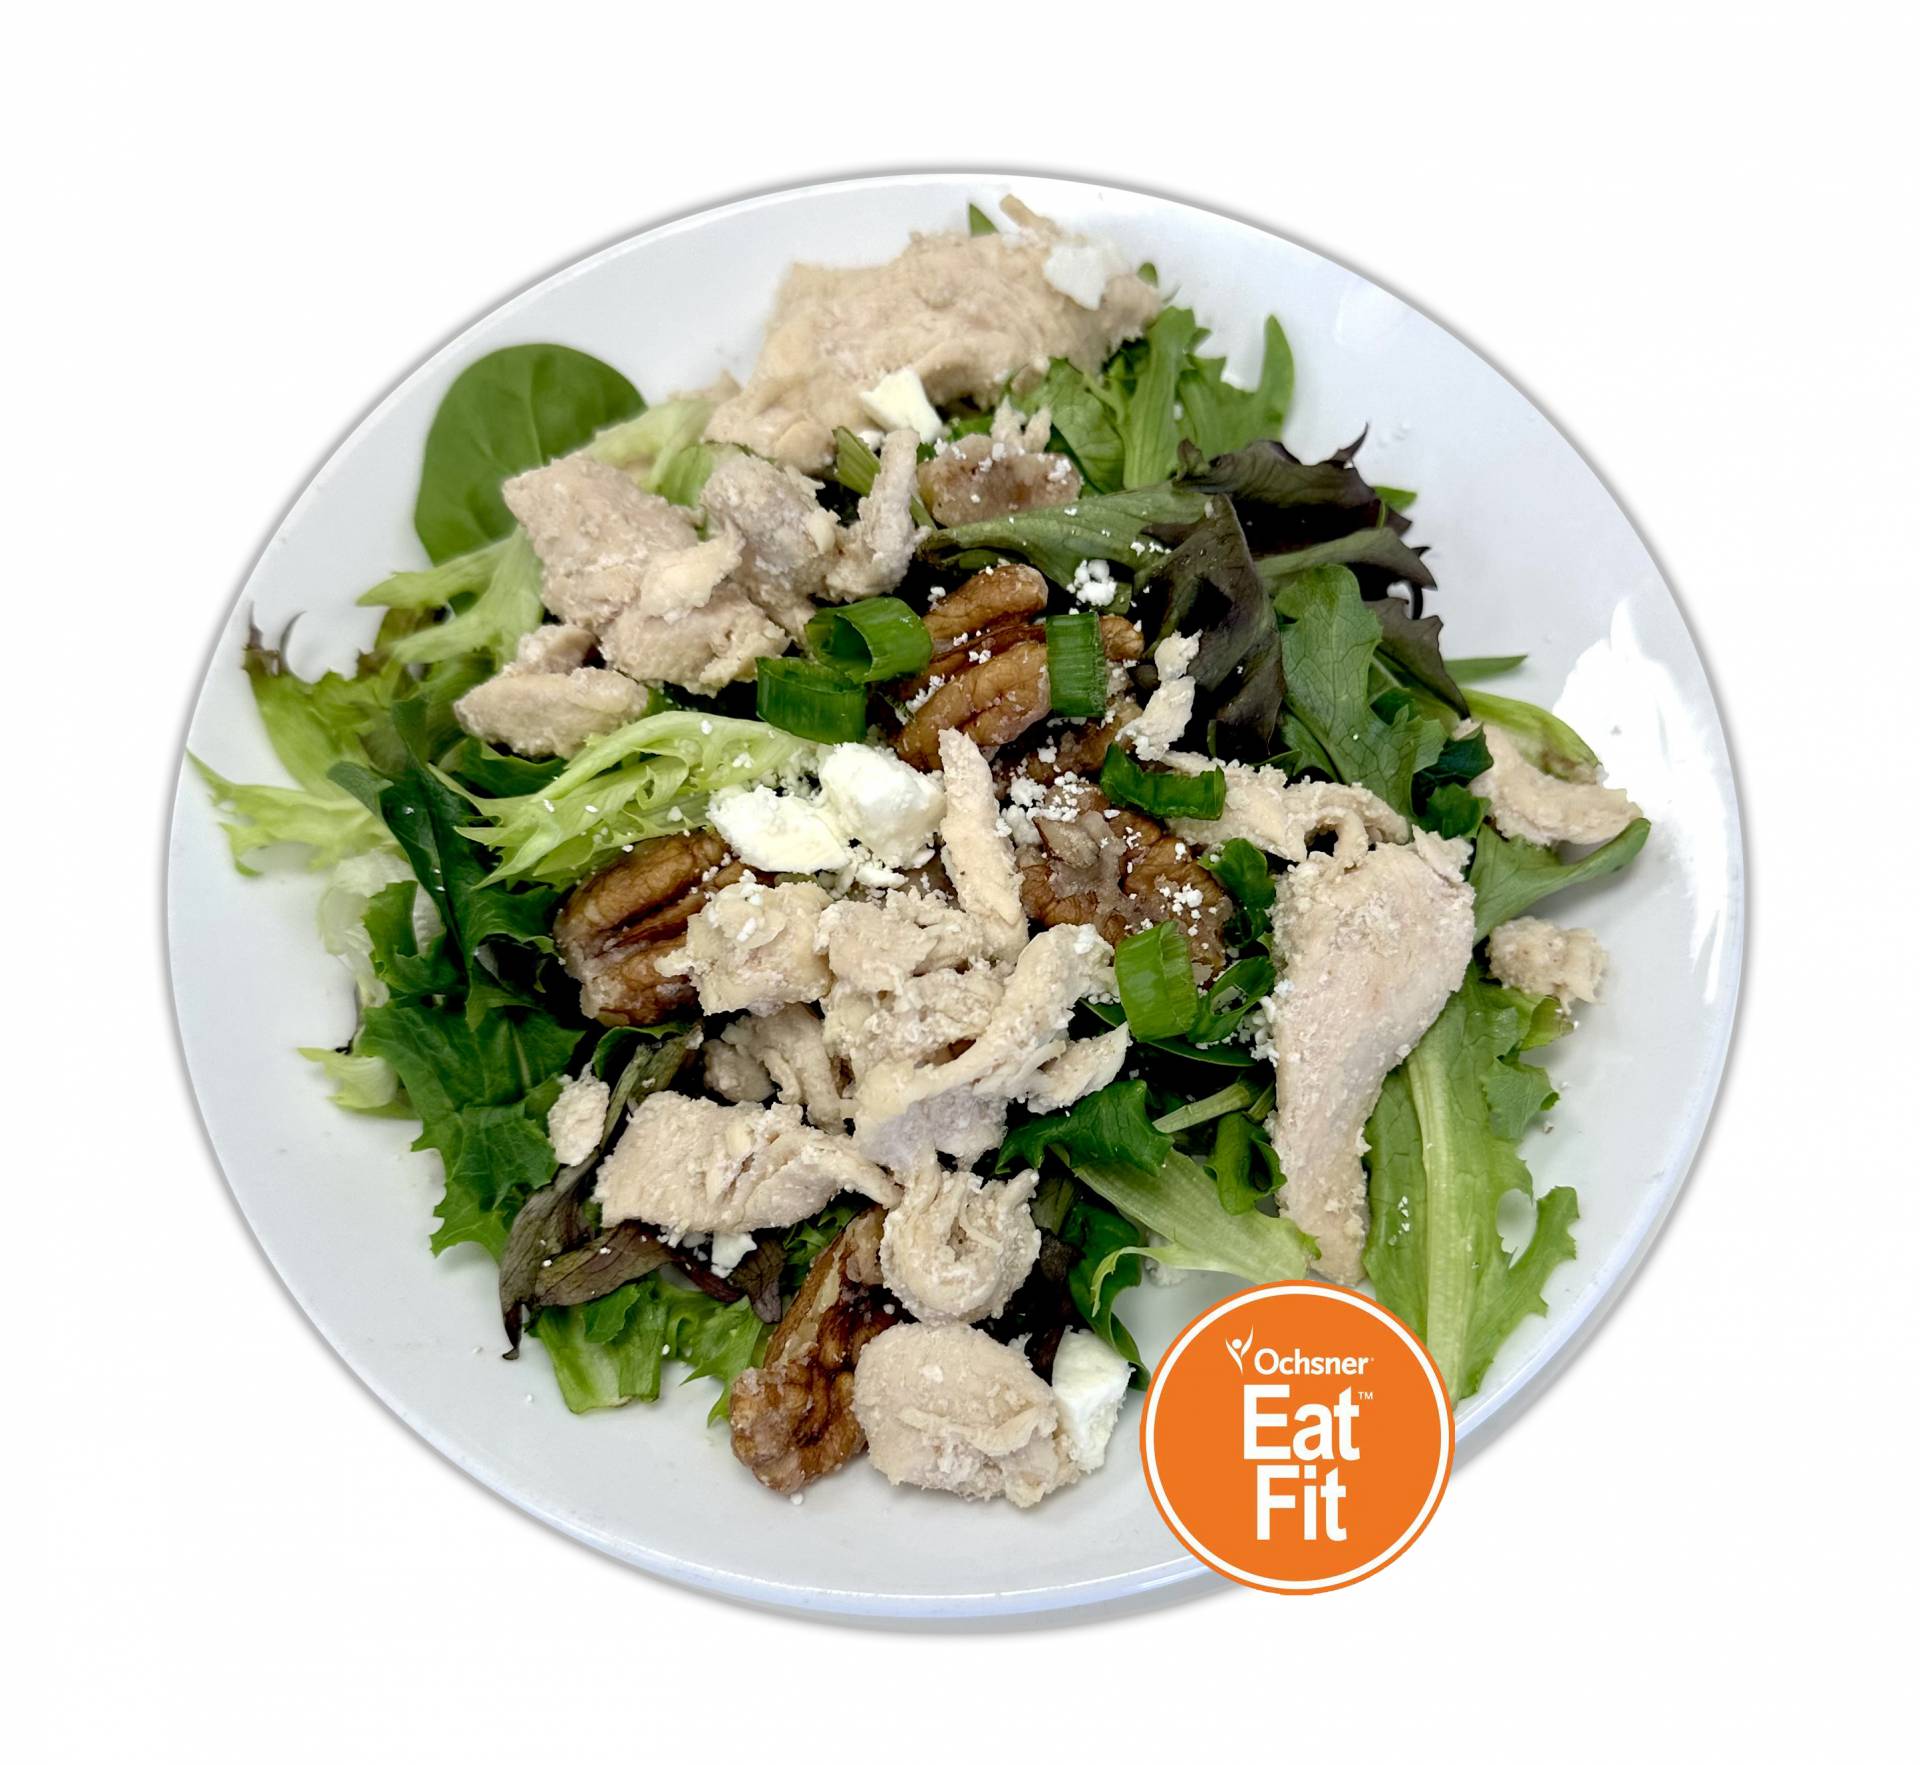 Grilled Chicken and Spinach Salad with Pecans and Balsamic Vinaigrette Dressing - Low Fat